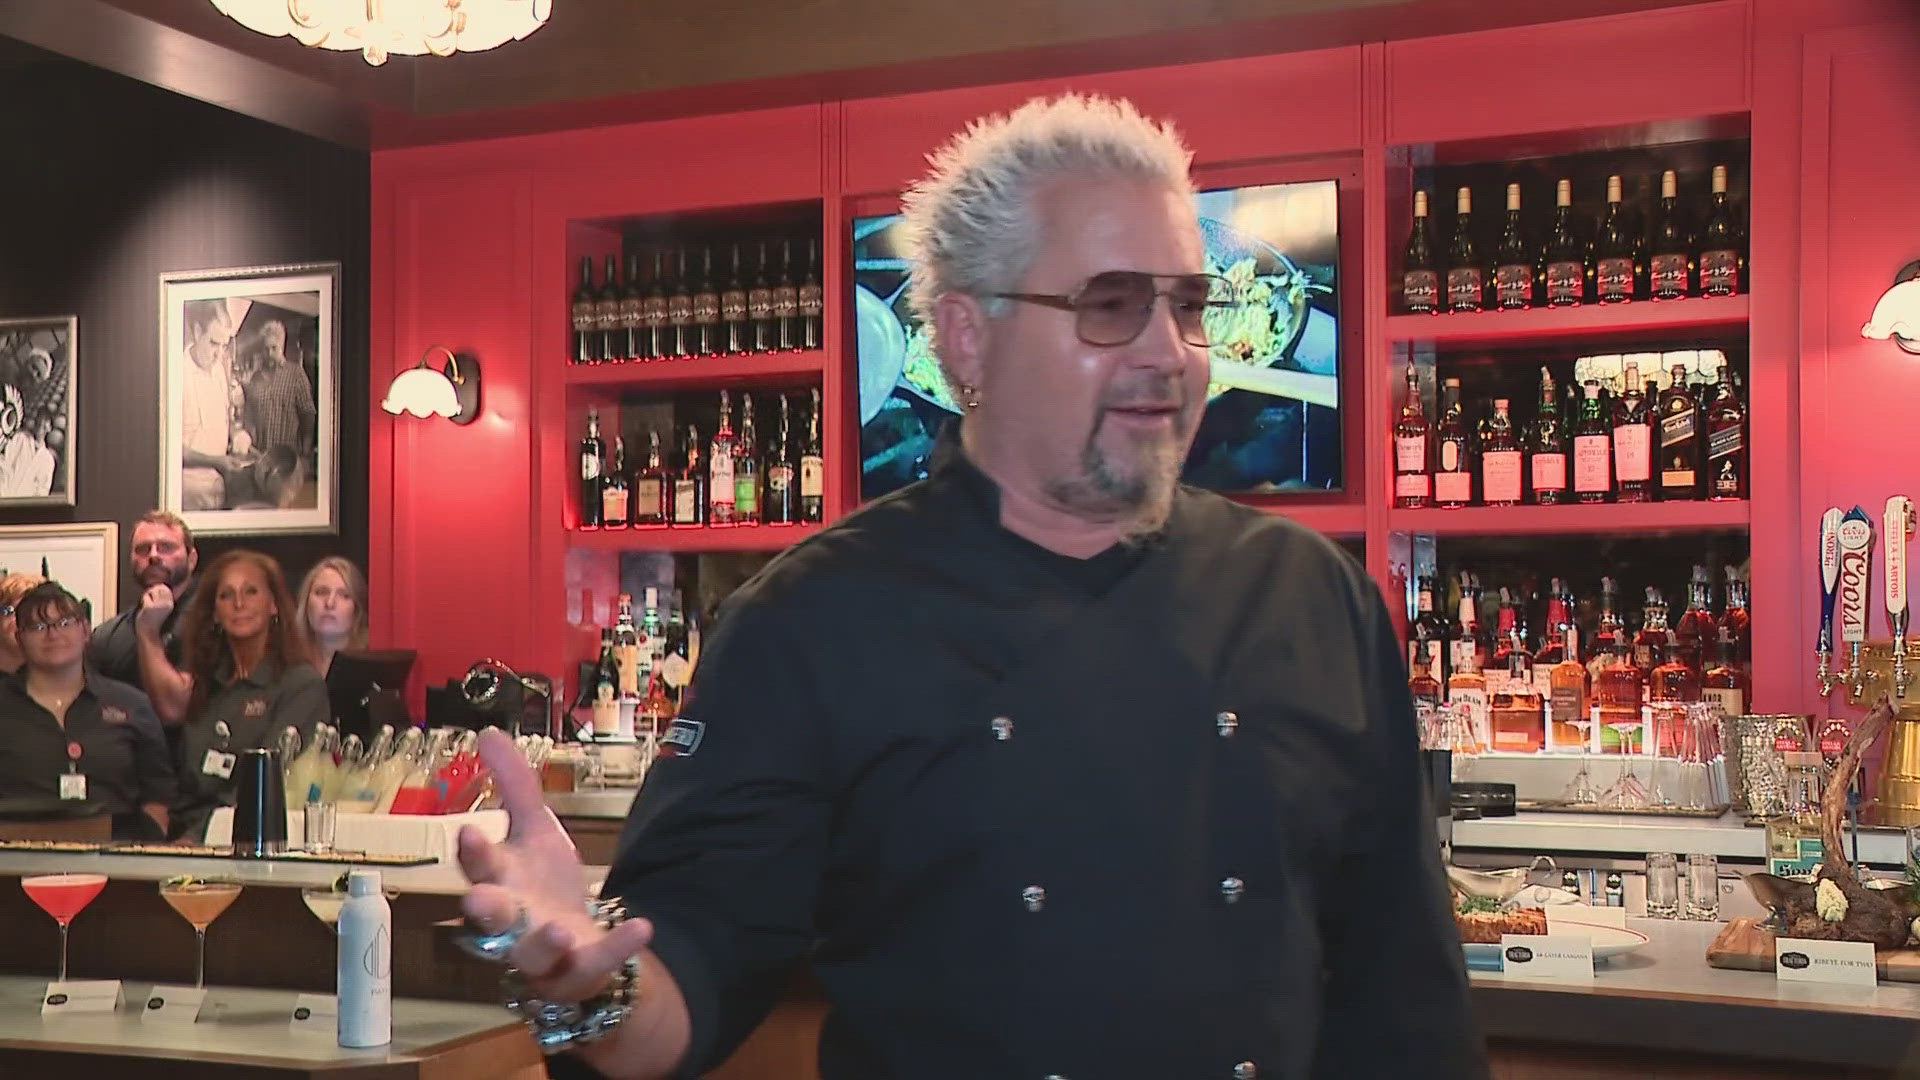 Fieri’s new restaurant is located at Eldorado Scioto Downs, just 15 minutes south of downtown Columbus.